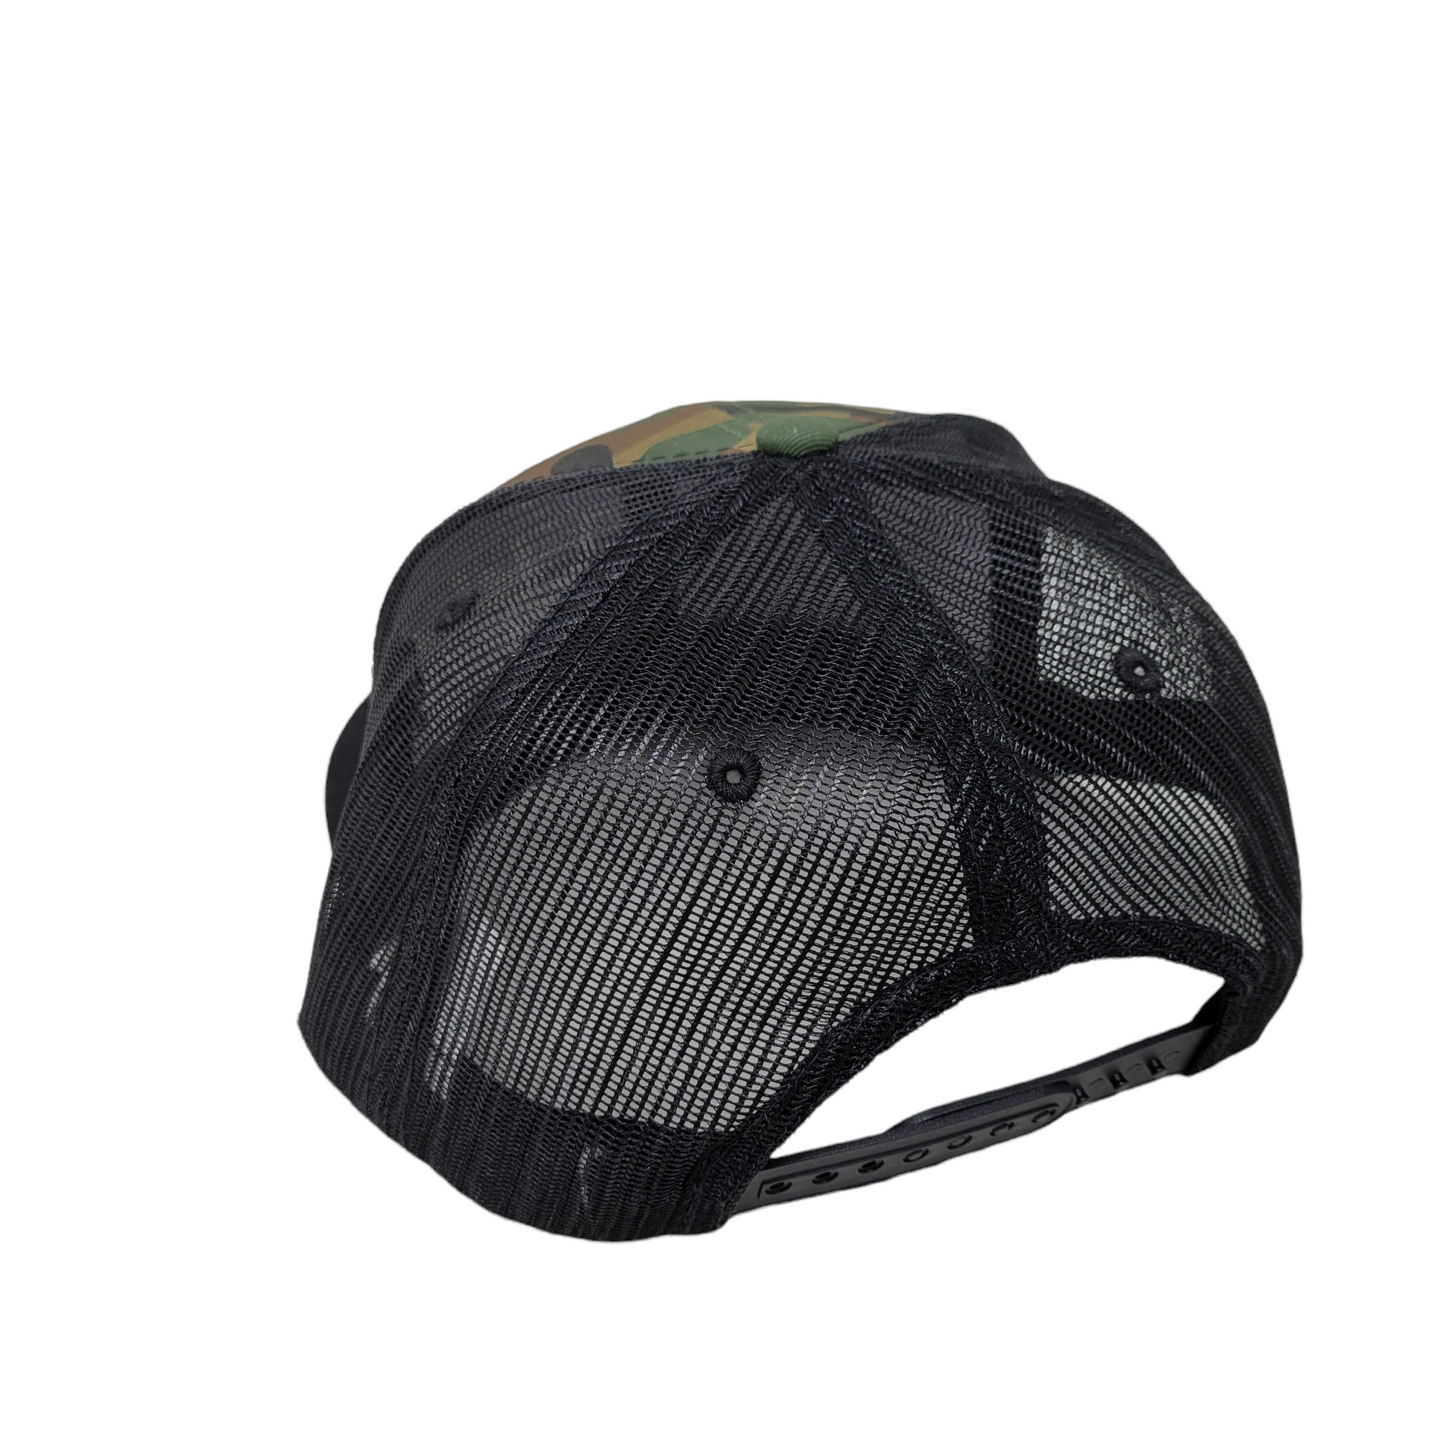 THE FOREST CAMO MESH TAG LOGO SNAPBACK HAT - Panic 39